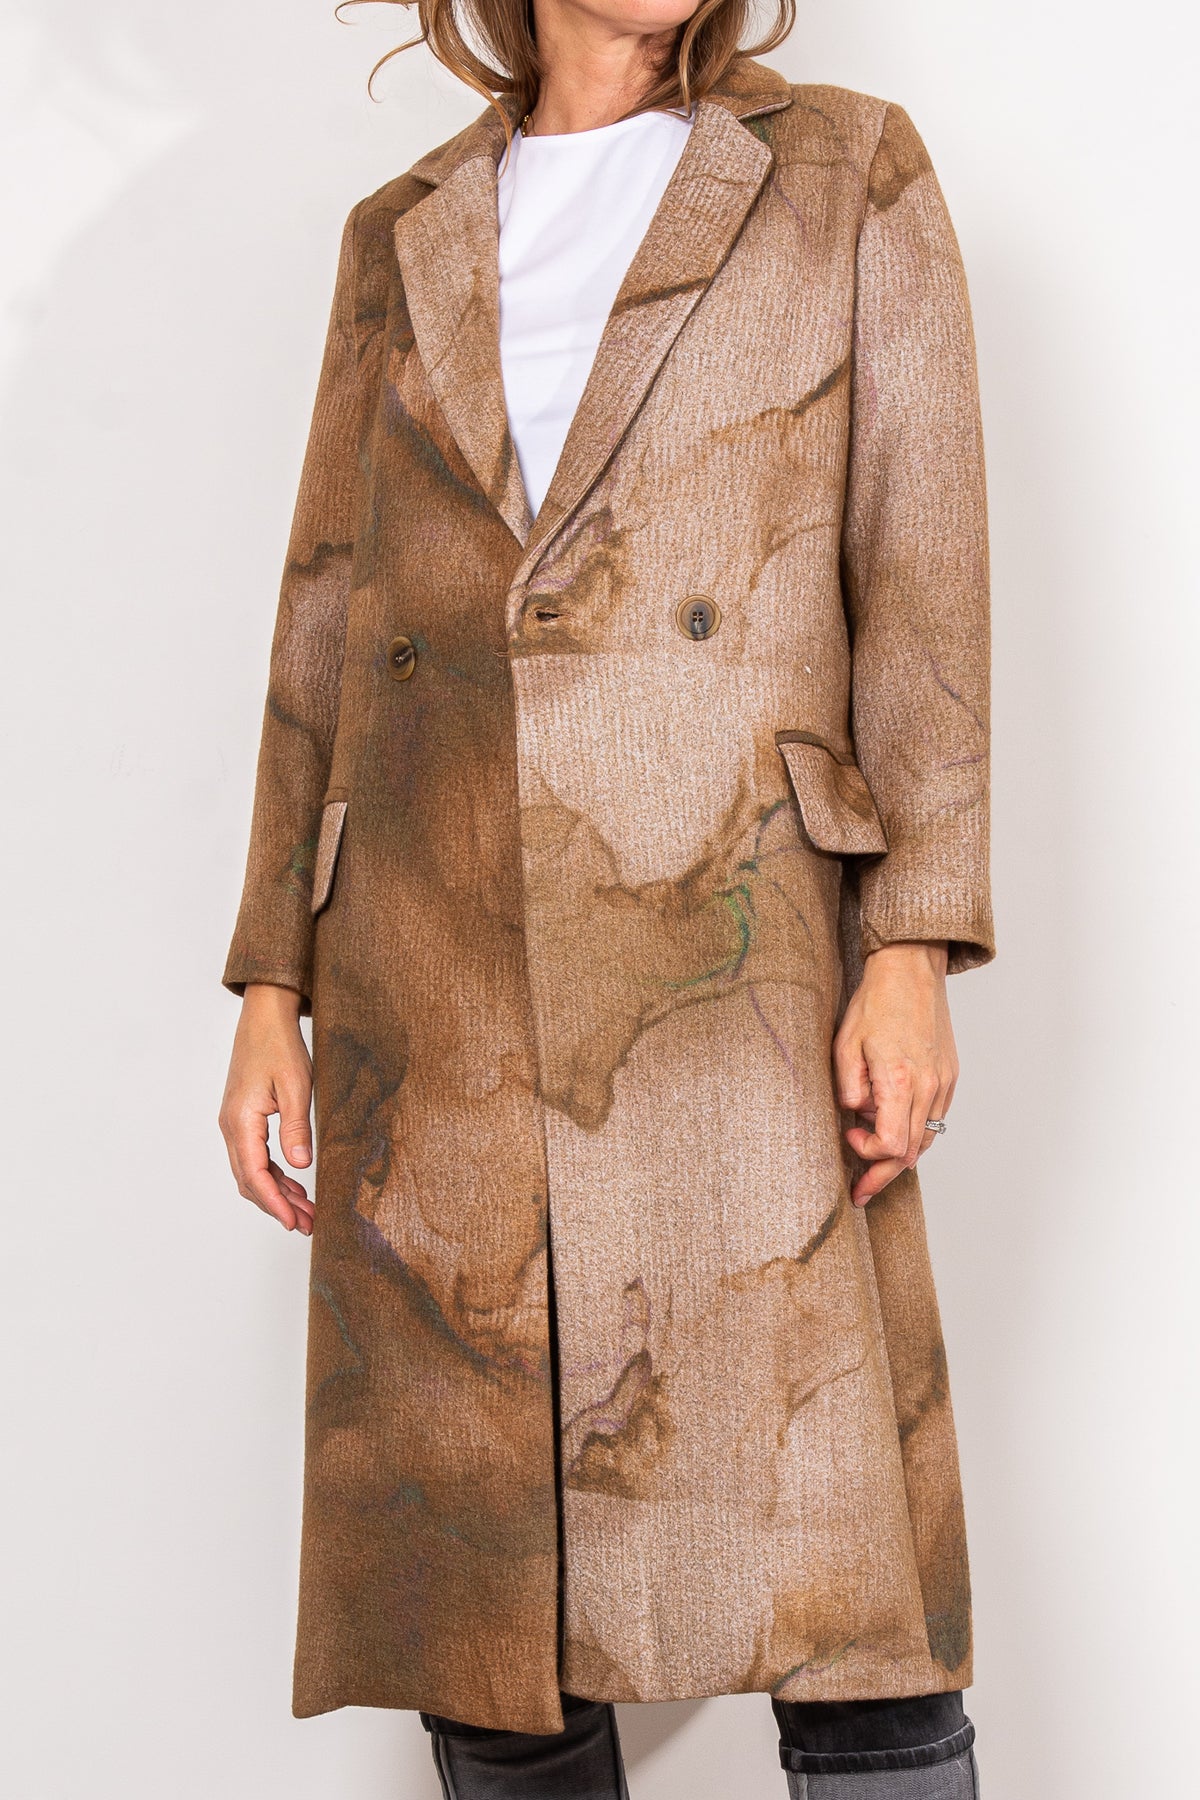 CURATE by Trelise Cooper Long Night Coat